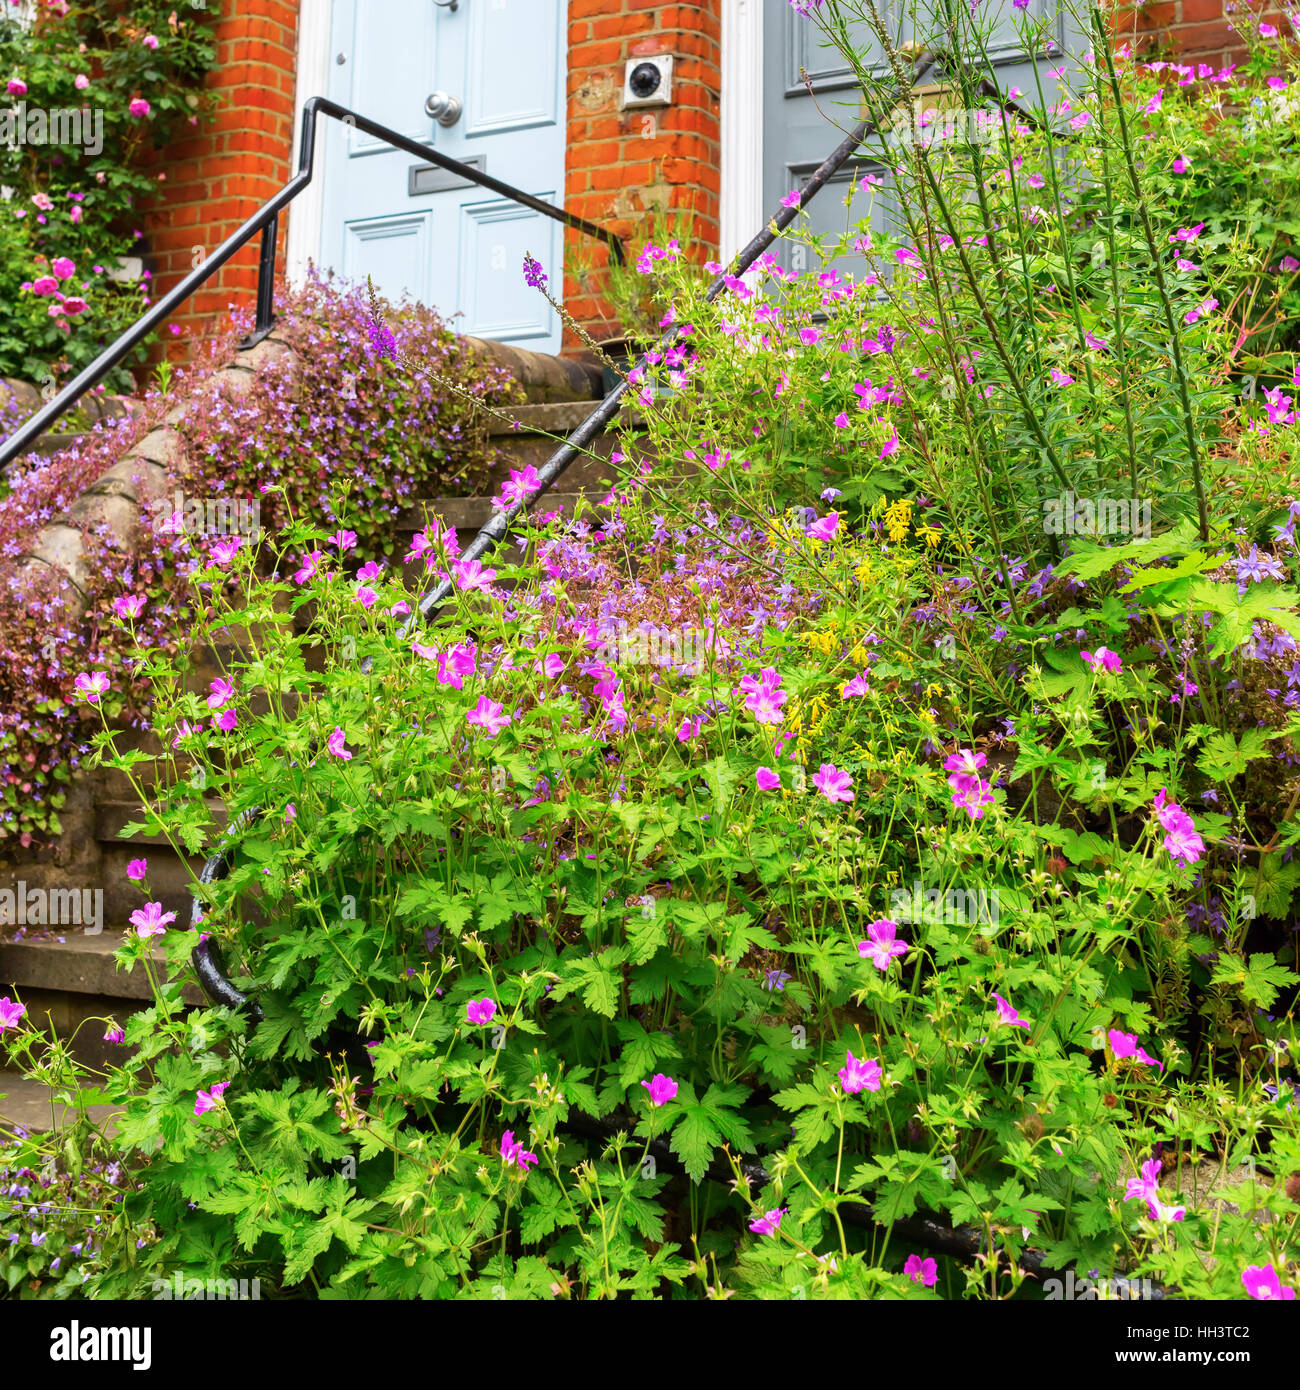 entrance overgrown with geranium plants in London, UK Stock Photo